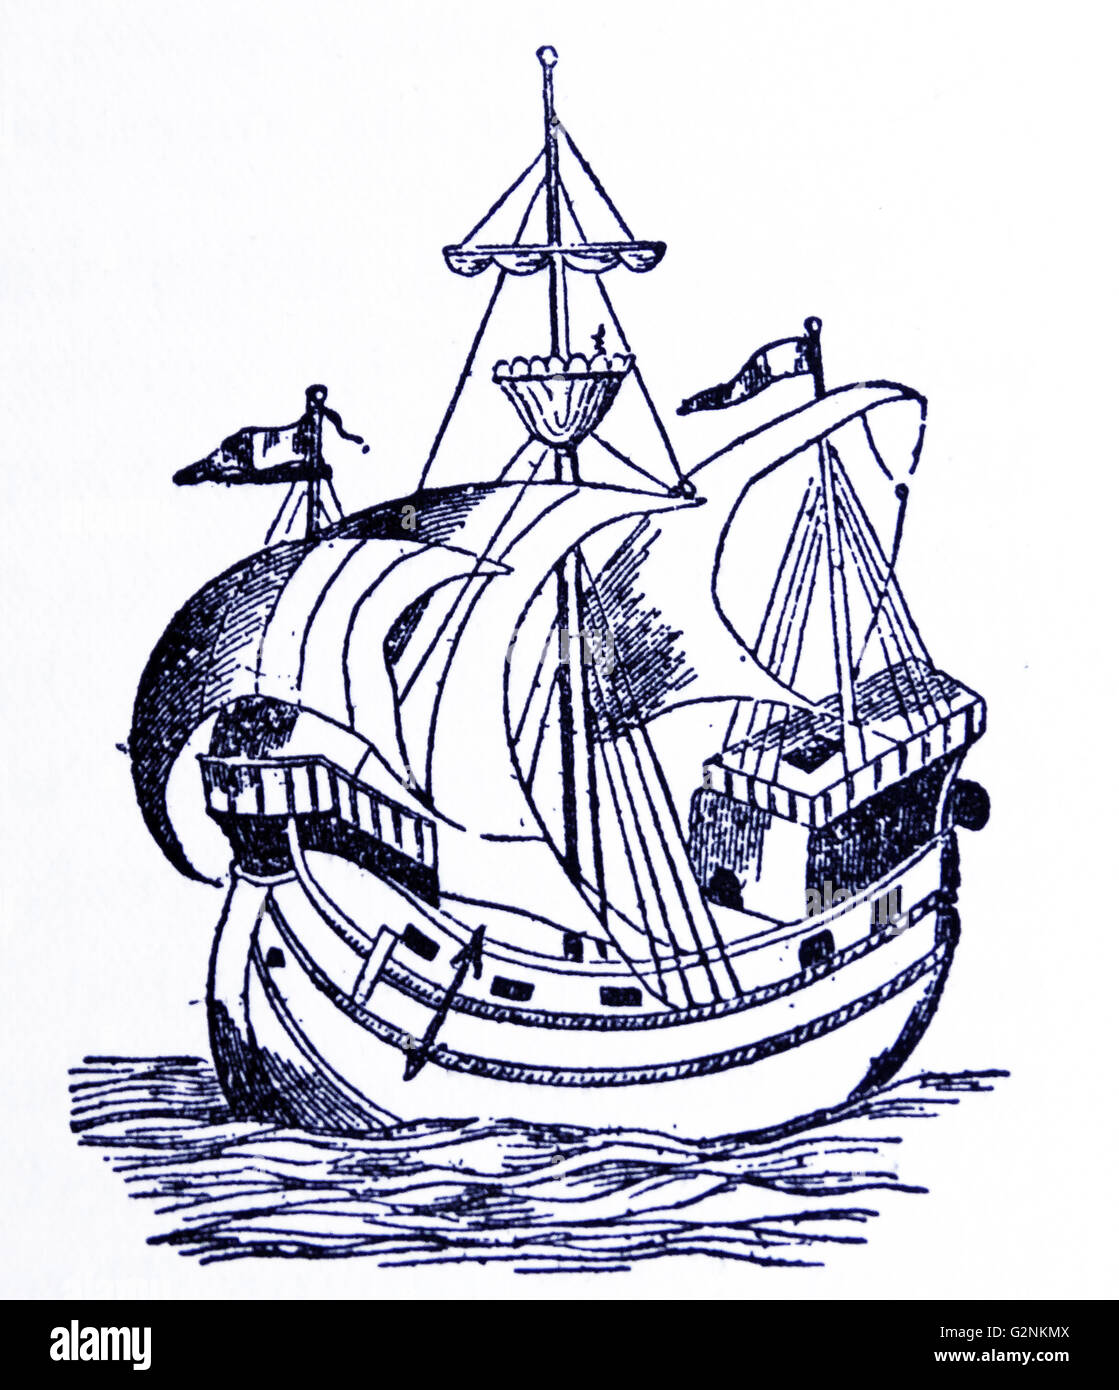 A ship of the 16th century. Stock Photo